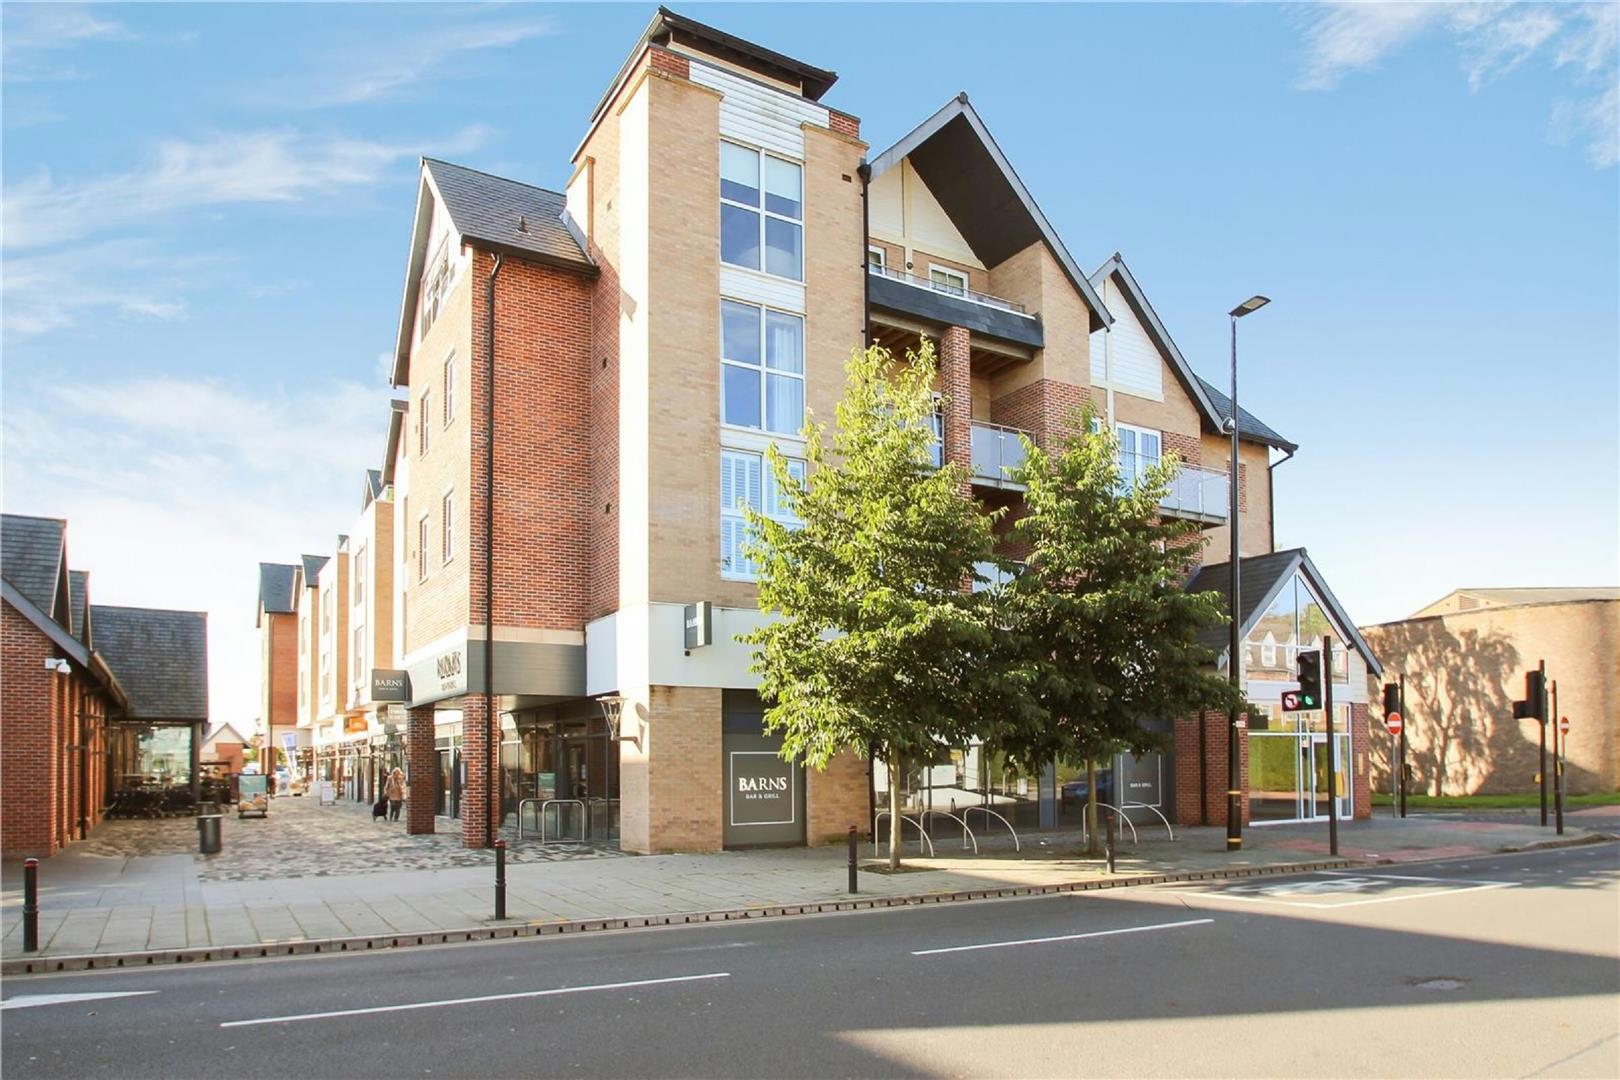 3 bed apartment for sale in Hale Road, Altrincham - Property Image 1